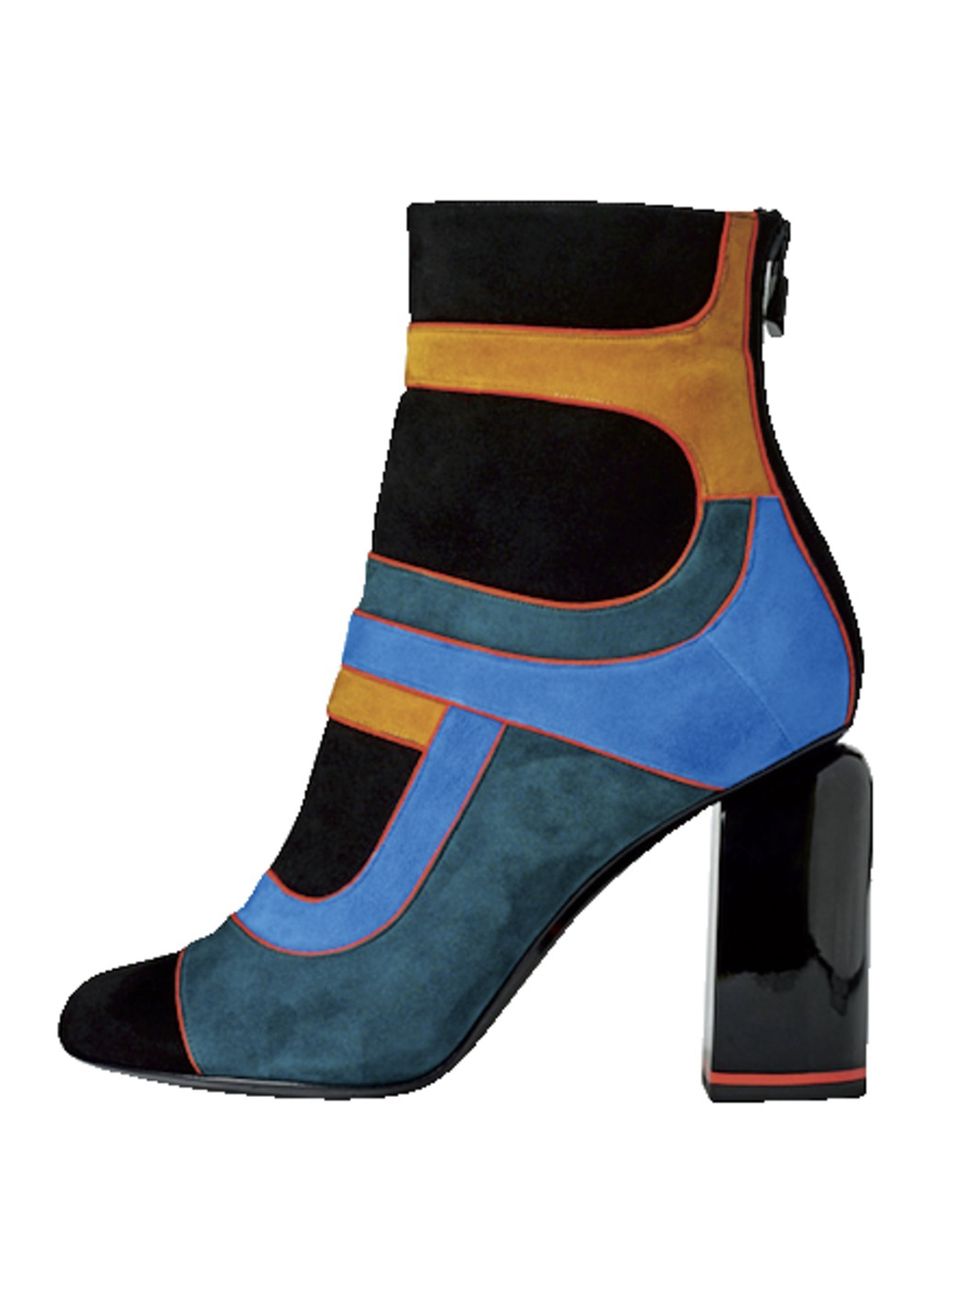 Footwear, Blue, Boot, Black, Electric blue, Aqua, Teal, Turquoise, Costume accessory, Synthetic rubber, 